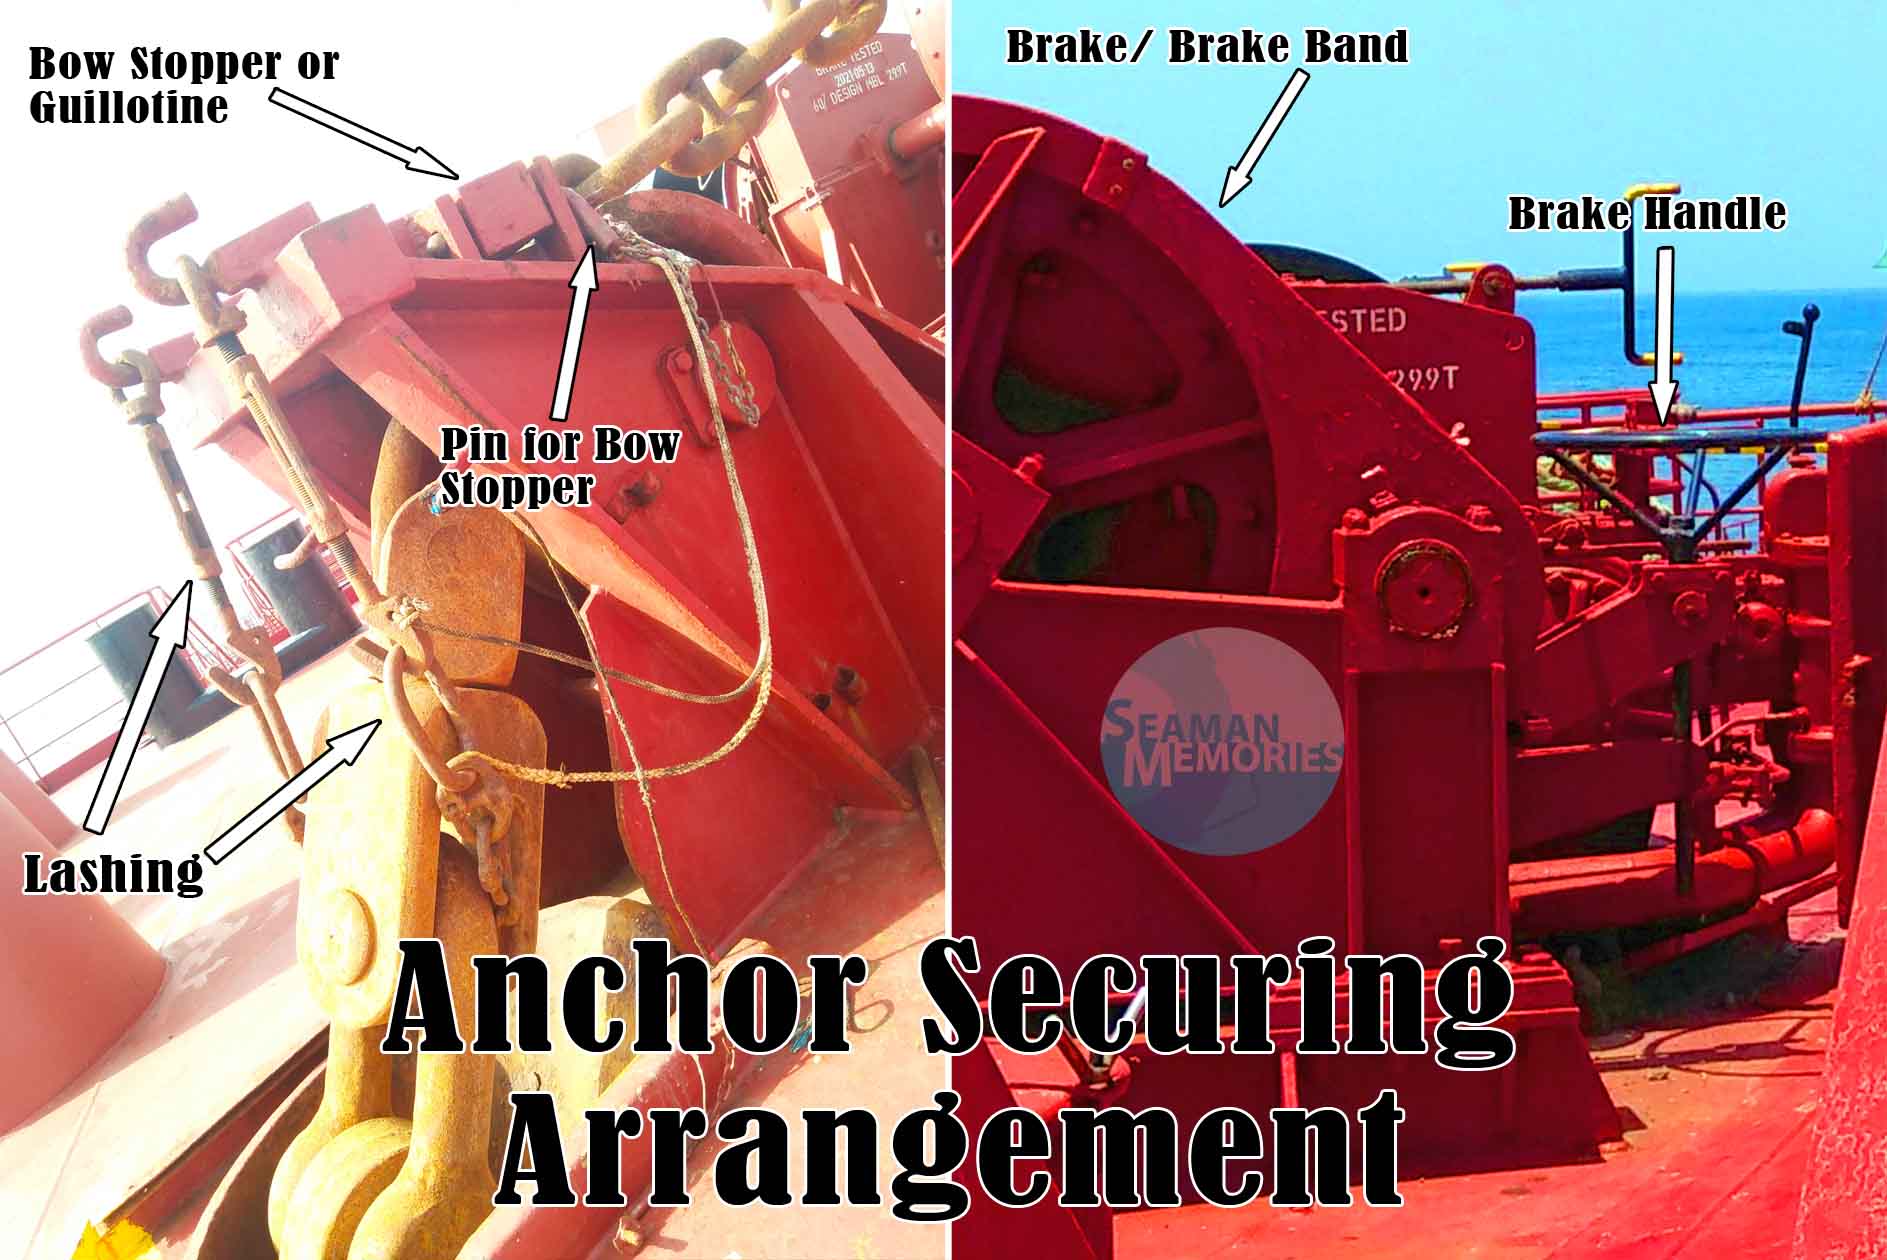 Anchor Securing Arrangement showing the bow stopper, lashings, brake, and brake handle.